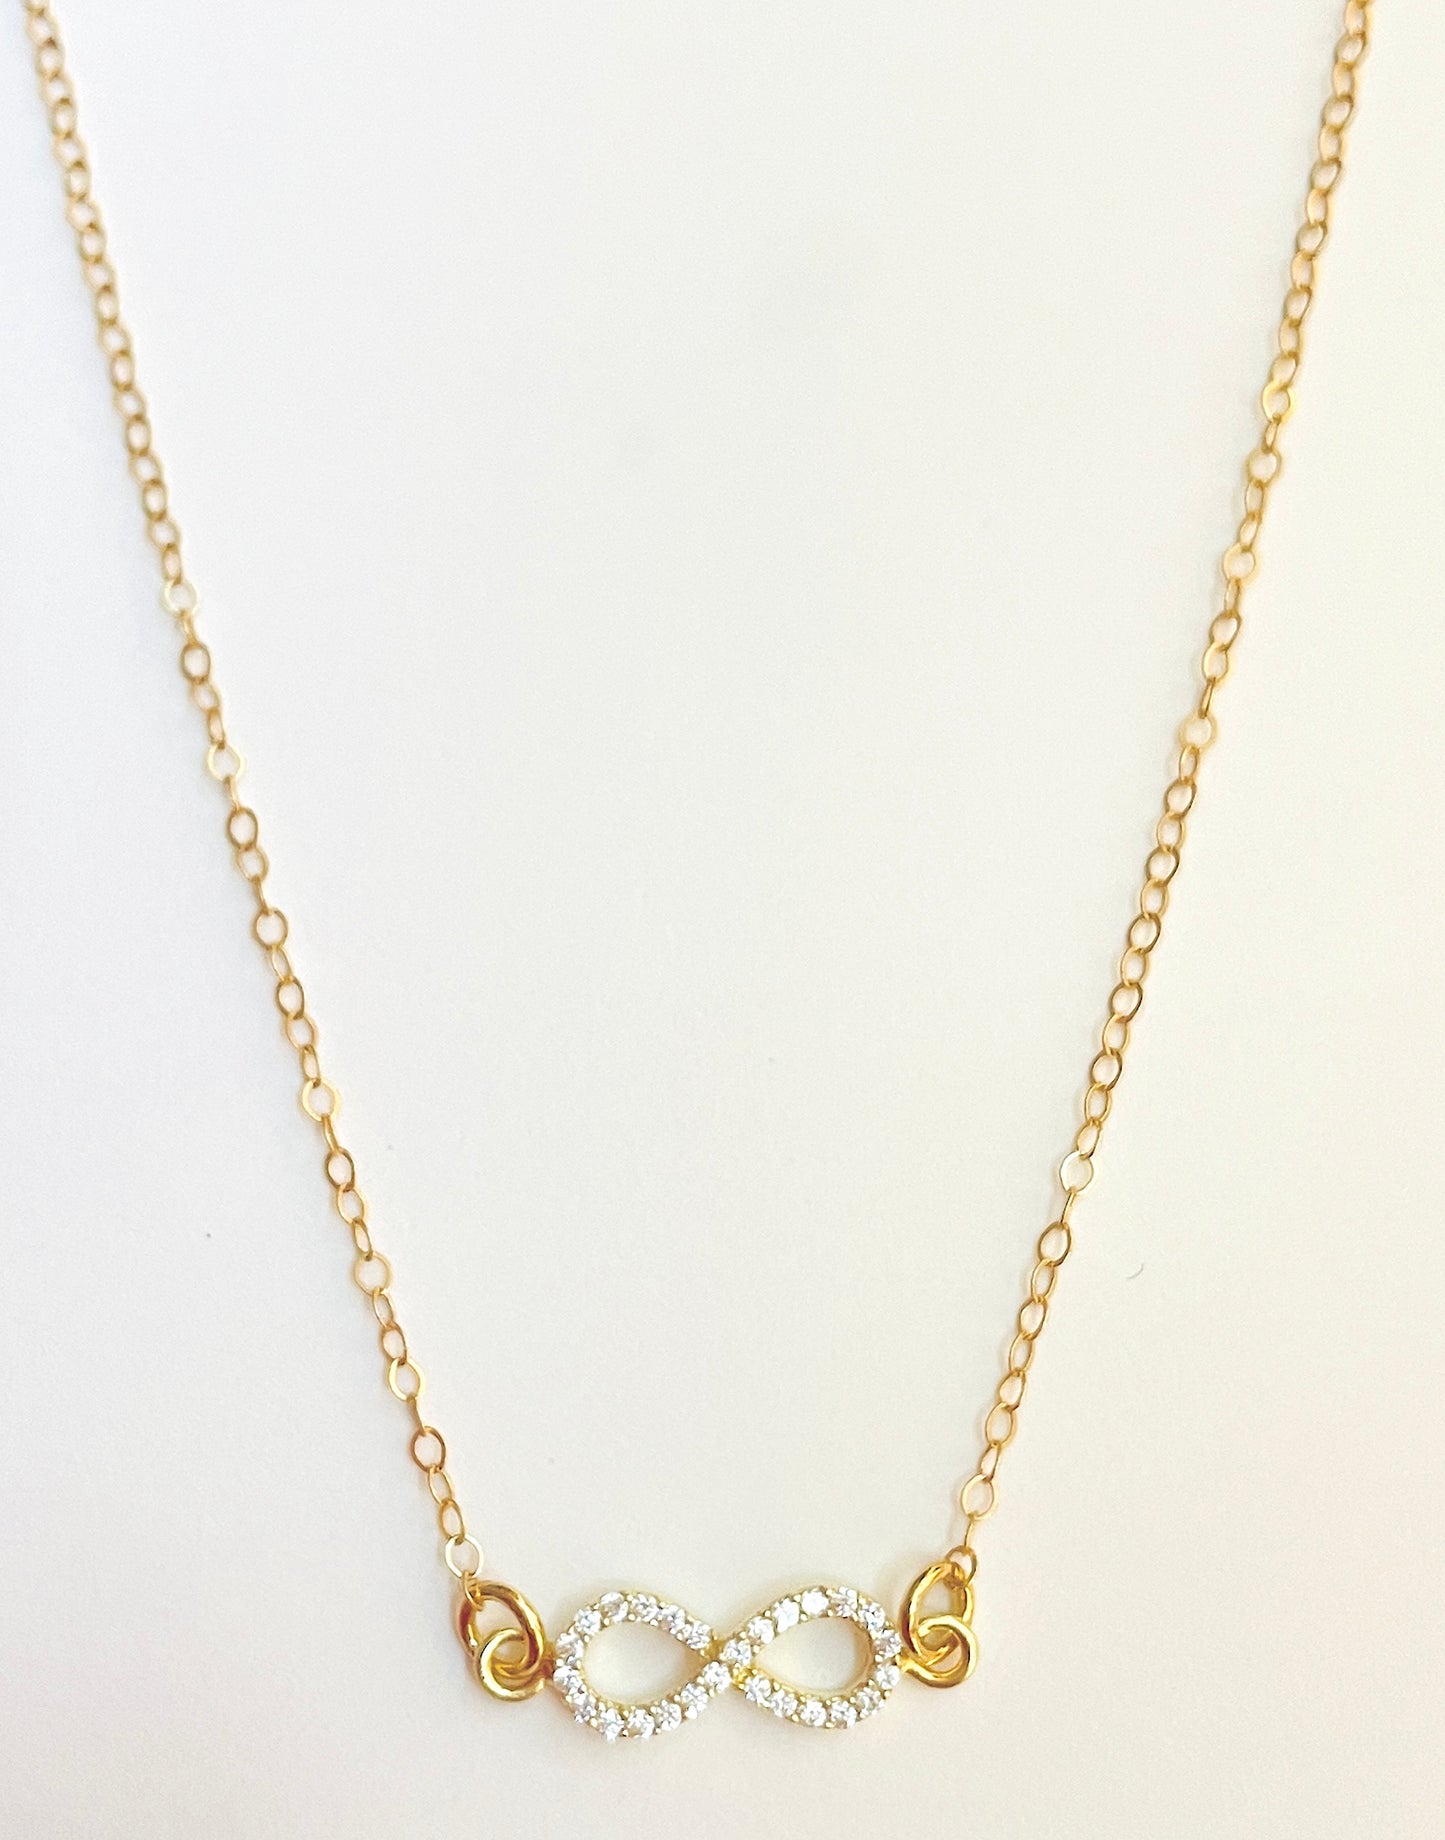 Encrusted Infinity Sign Necklace